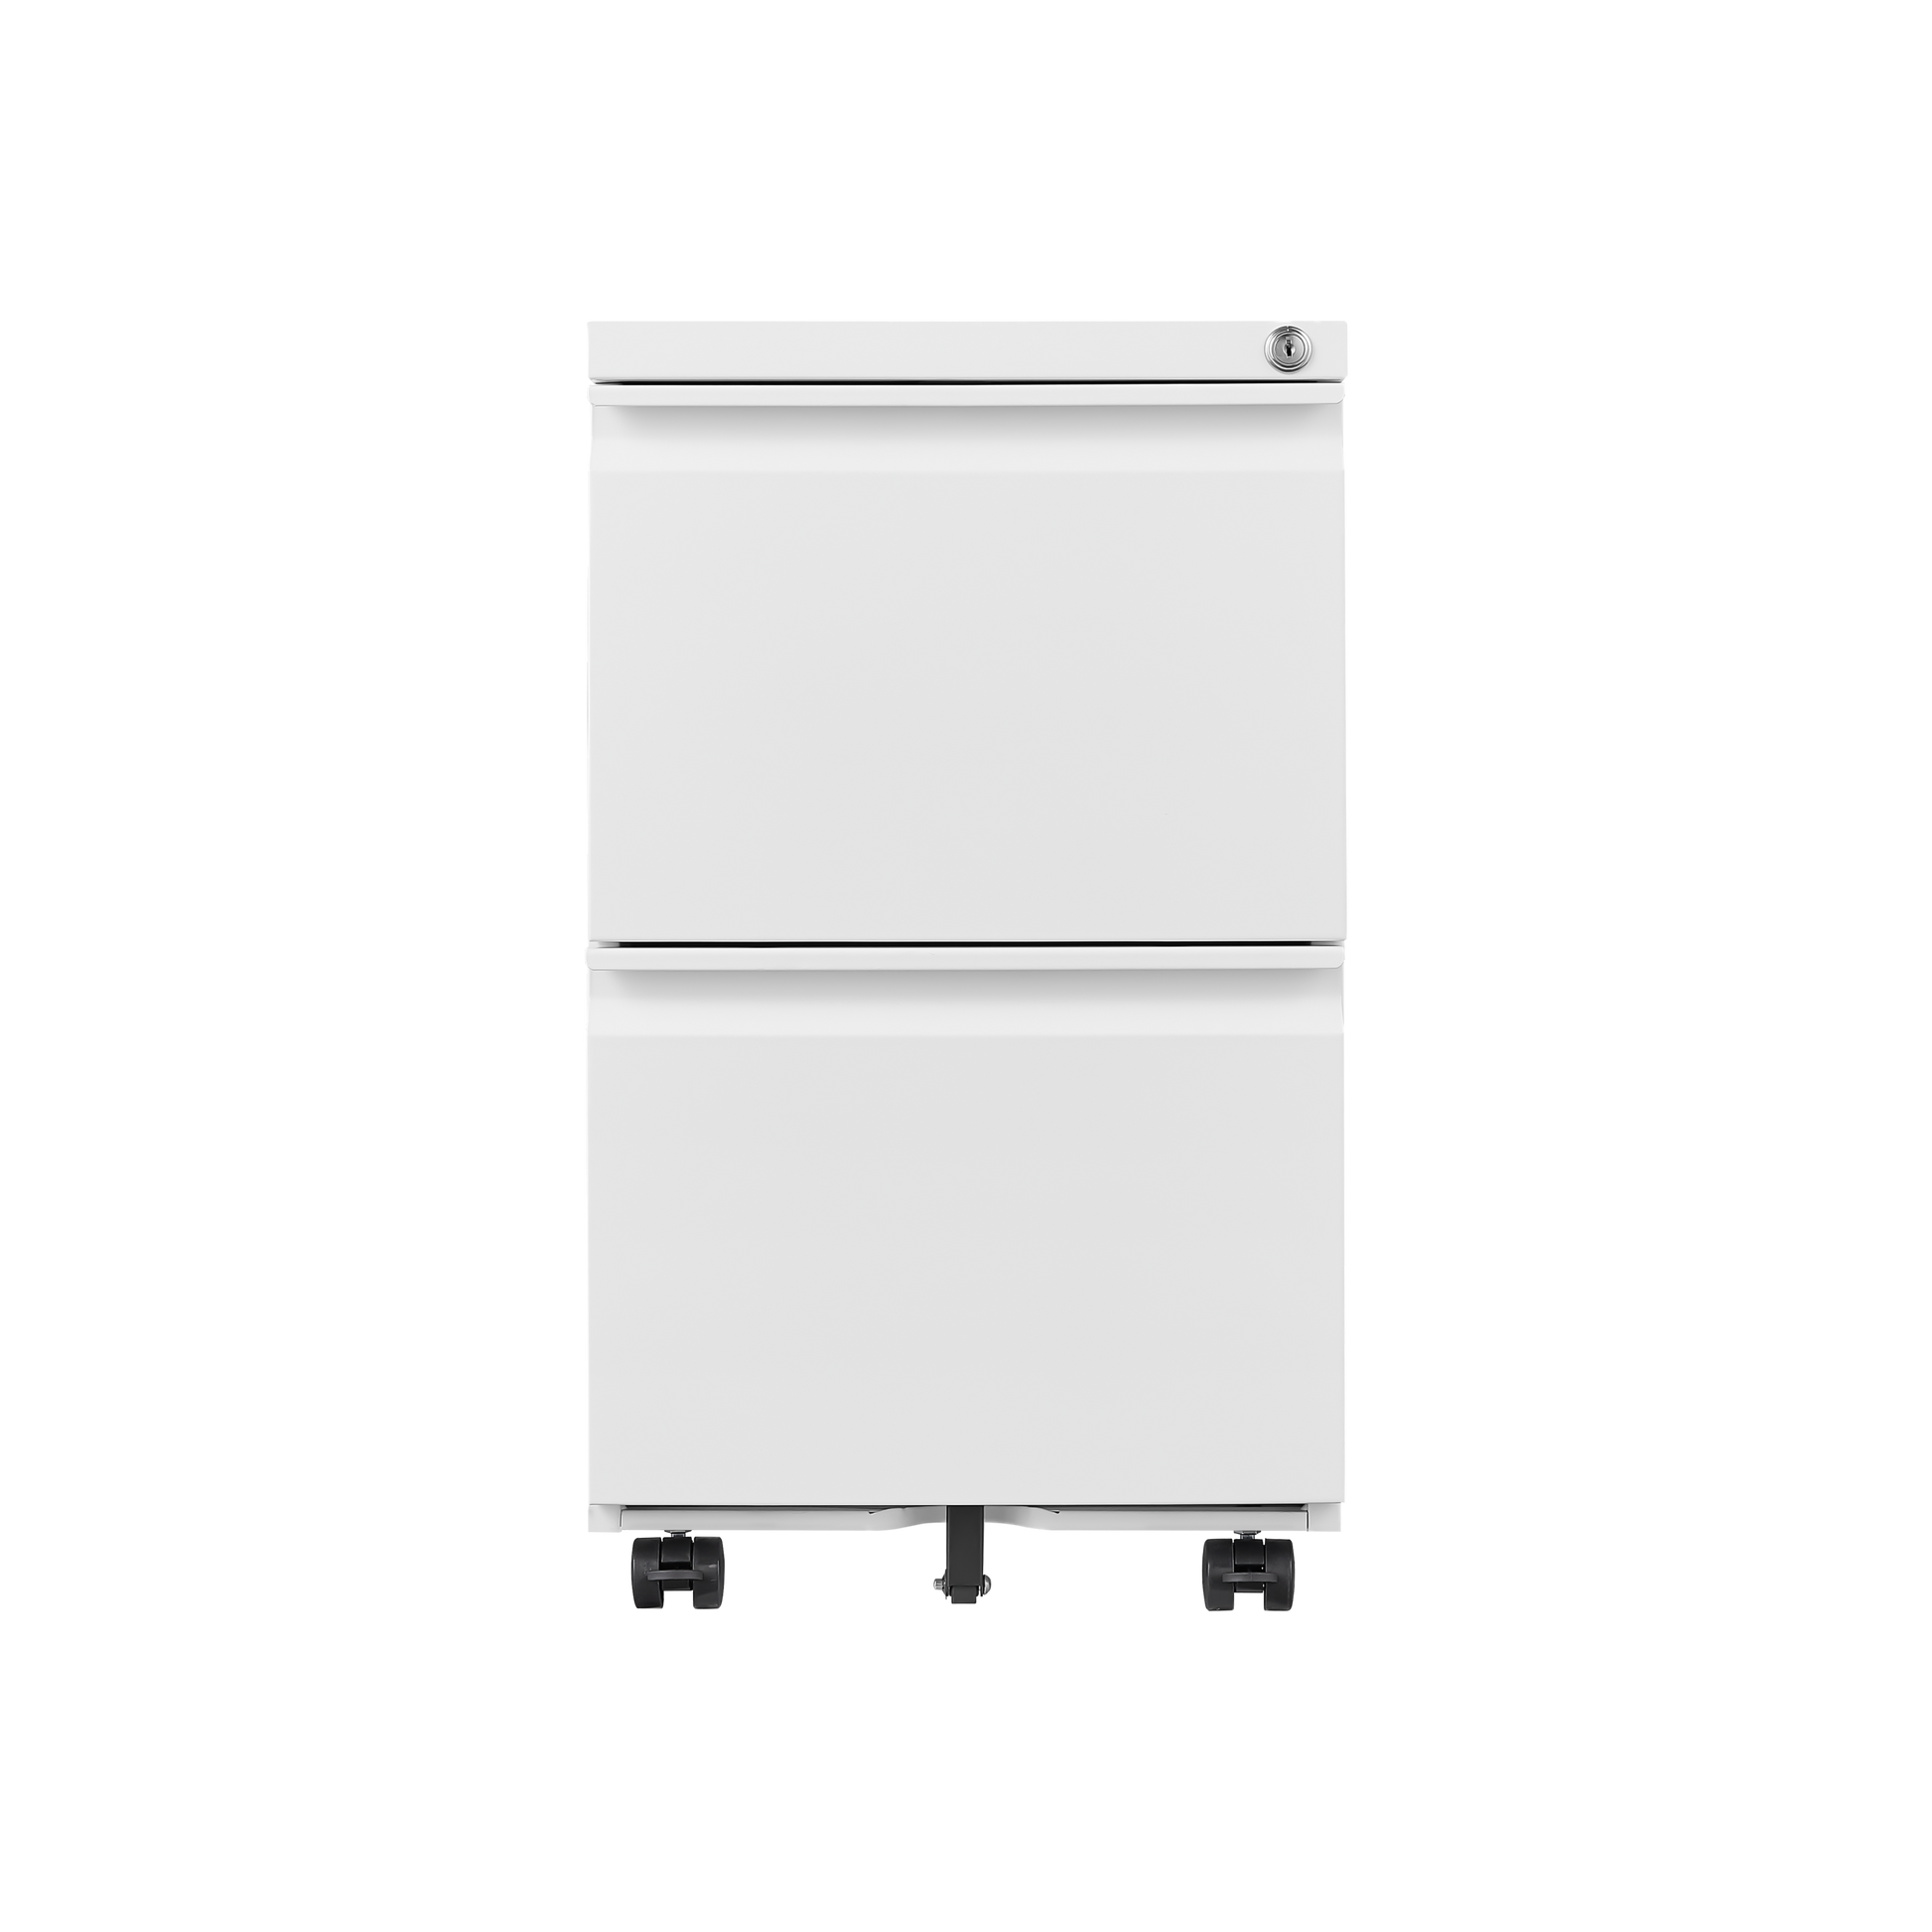 2 Drawer Mobile File Cabinet with Lock, Desk Office